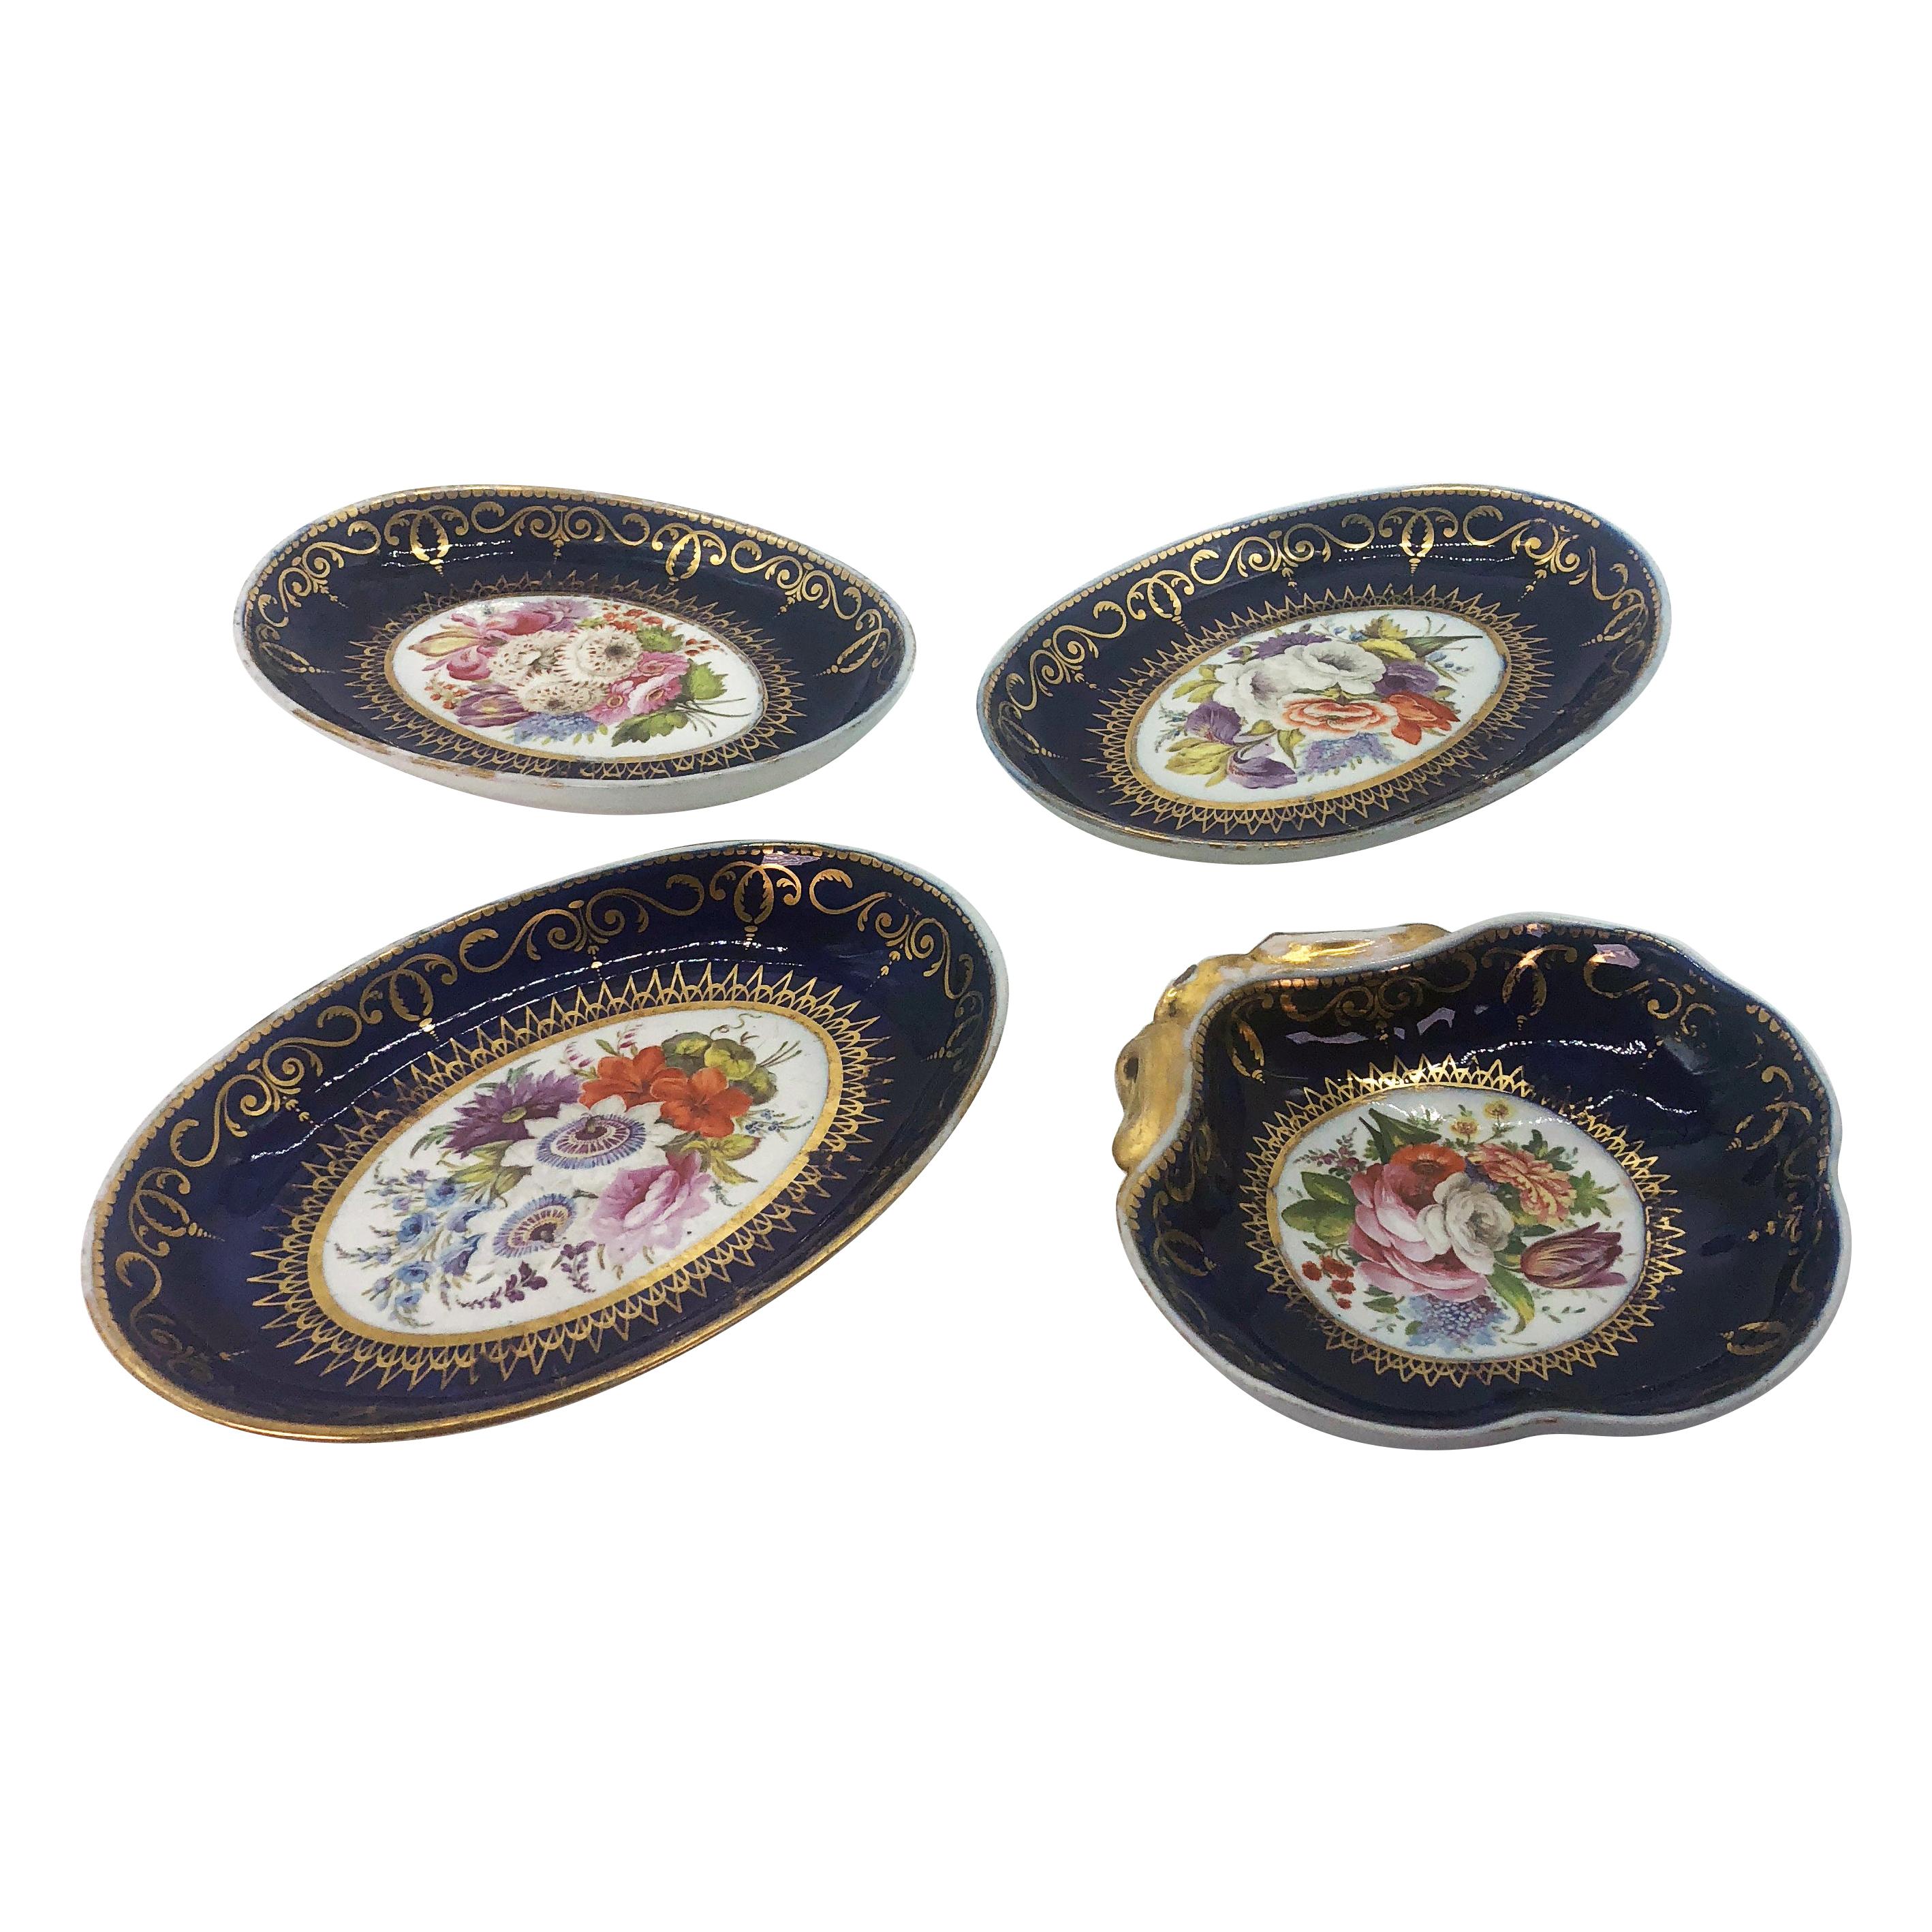 Four Regency Hand Painted Porcelain Dishes by Coalport, circa 1805